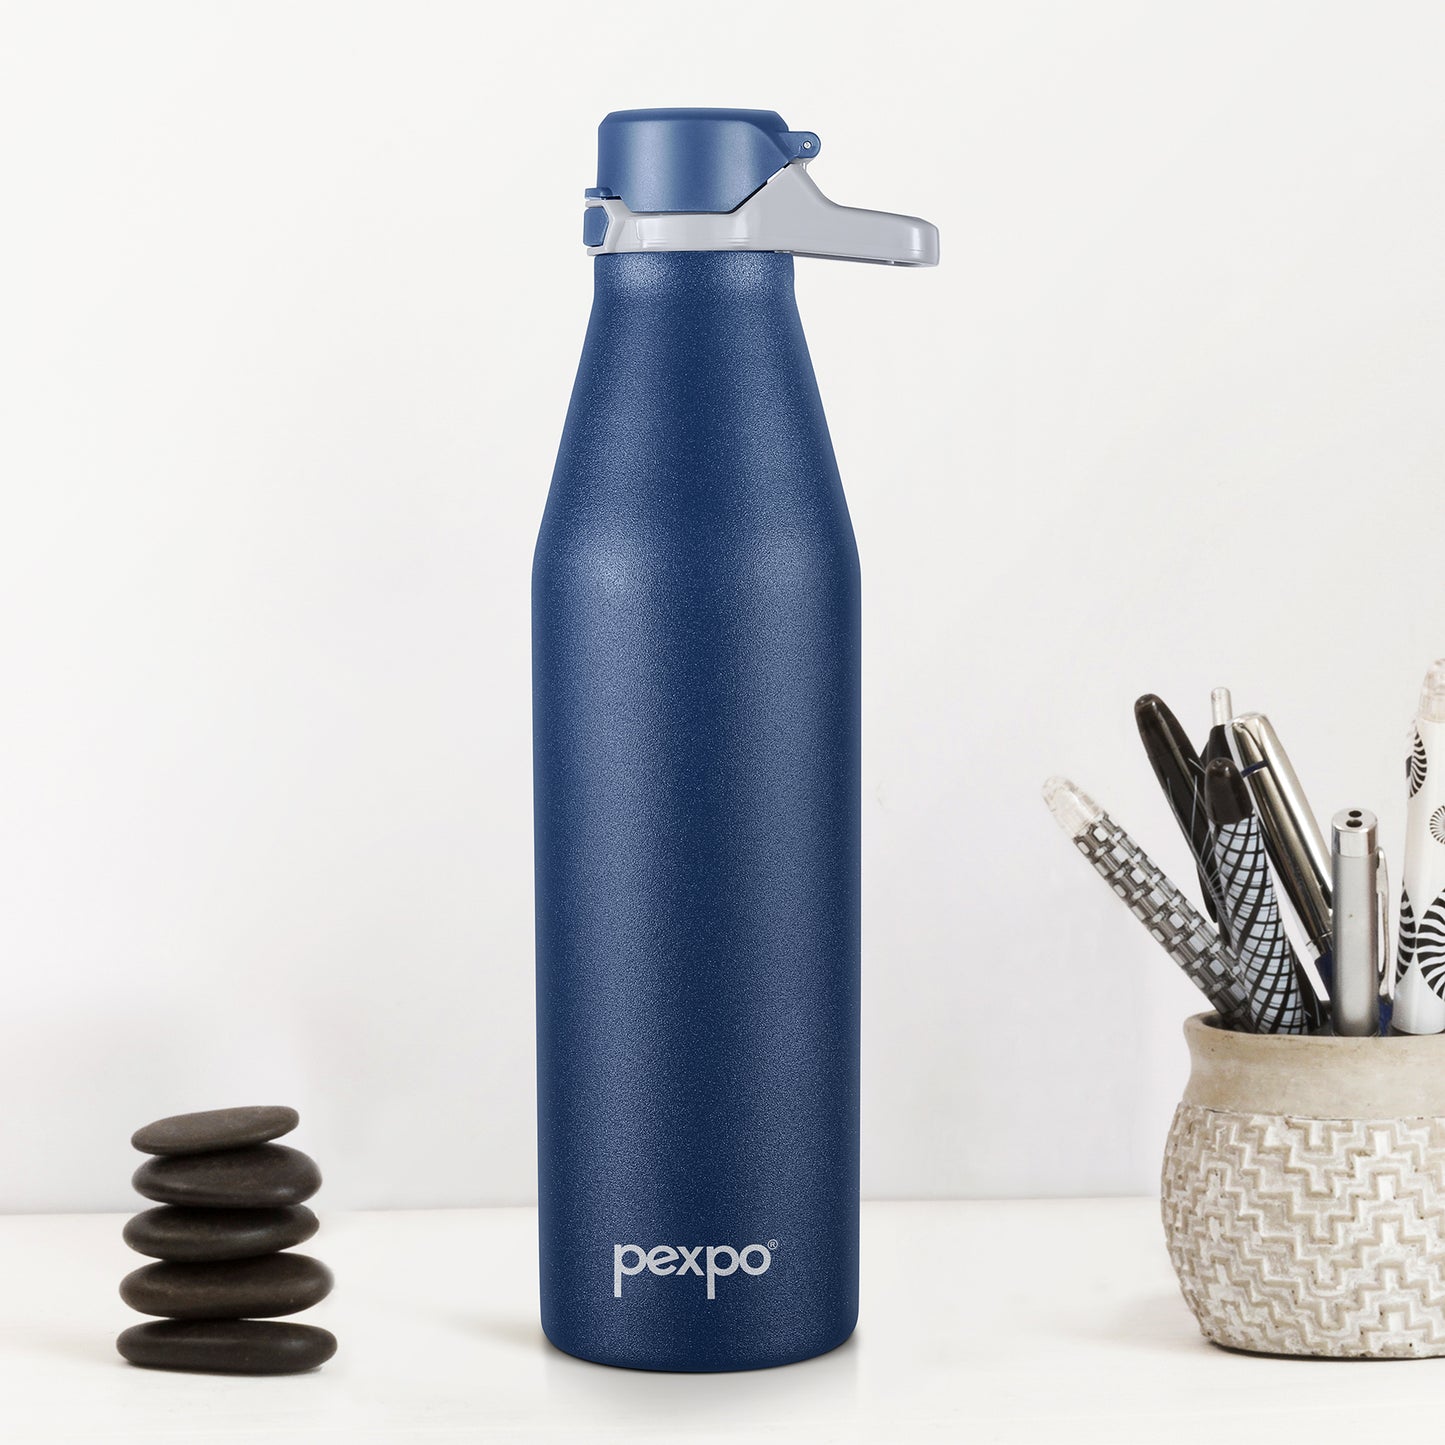 Pexpo Lotto- Stainless Steel Hot and Cold Vacuum Insulated Flask | Lightweight & Keeps Drinks Hot/Cold for 24+ Hours